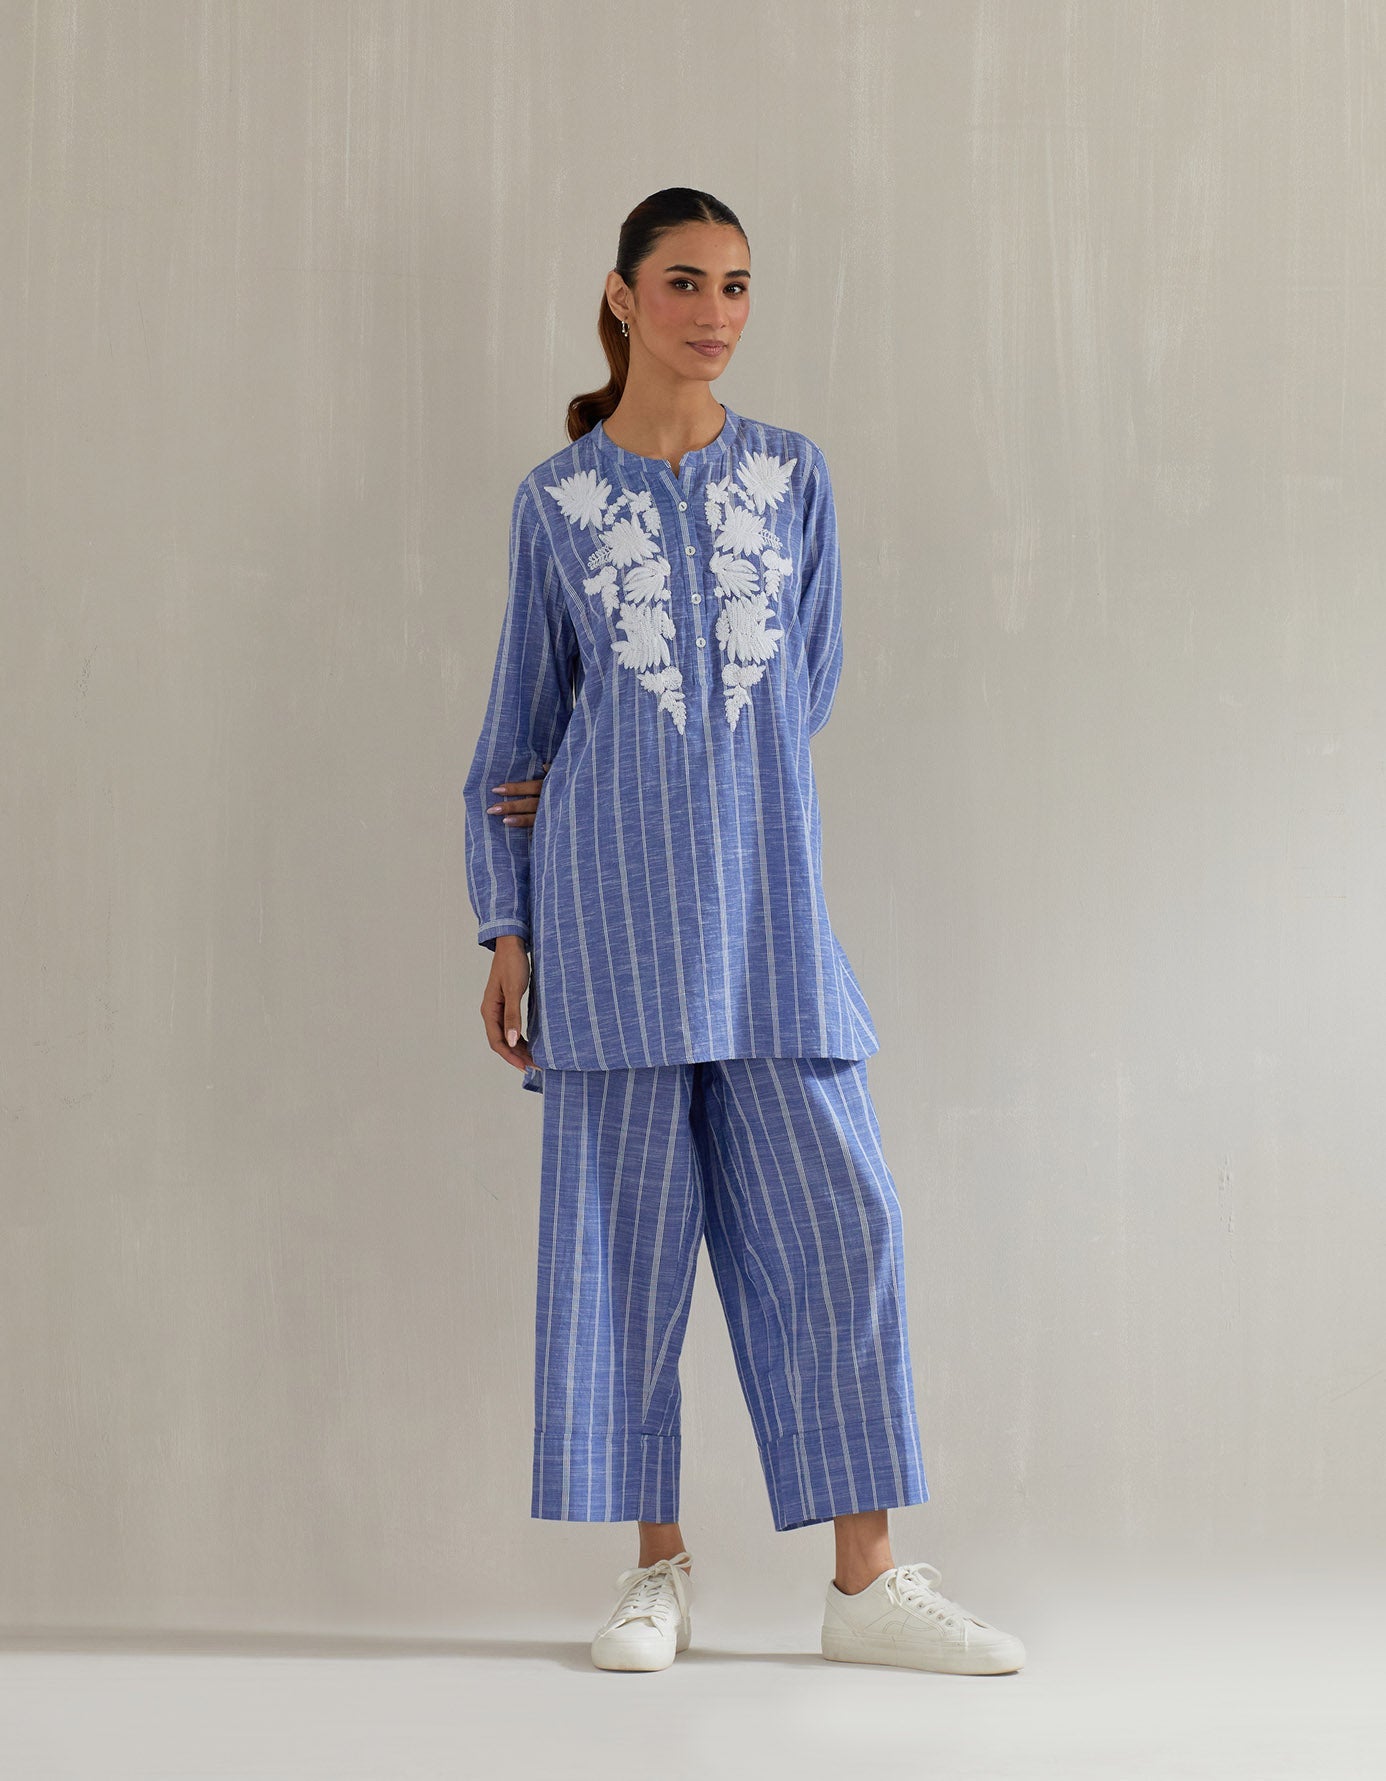 Blues Stripe Tunic with Pant